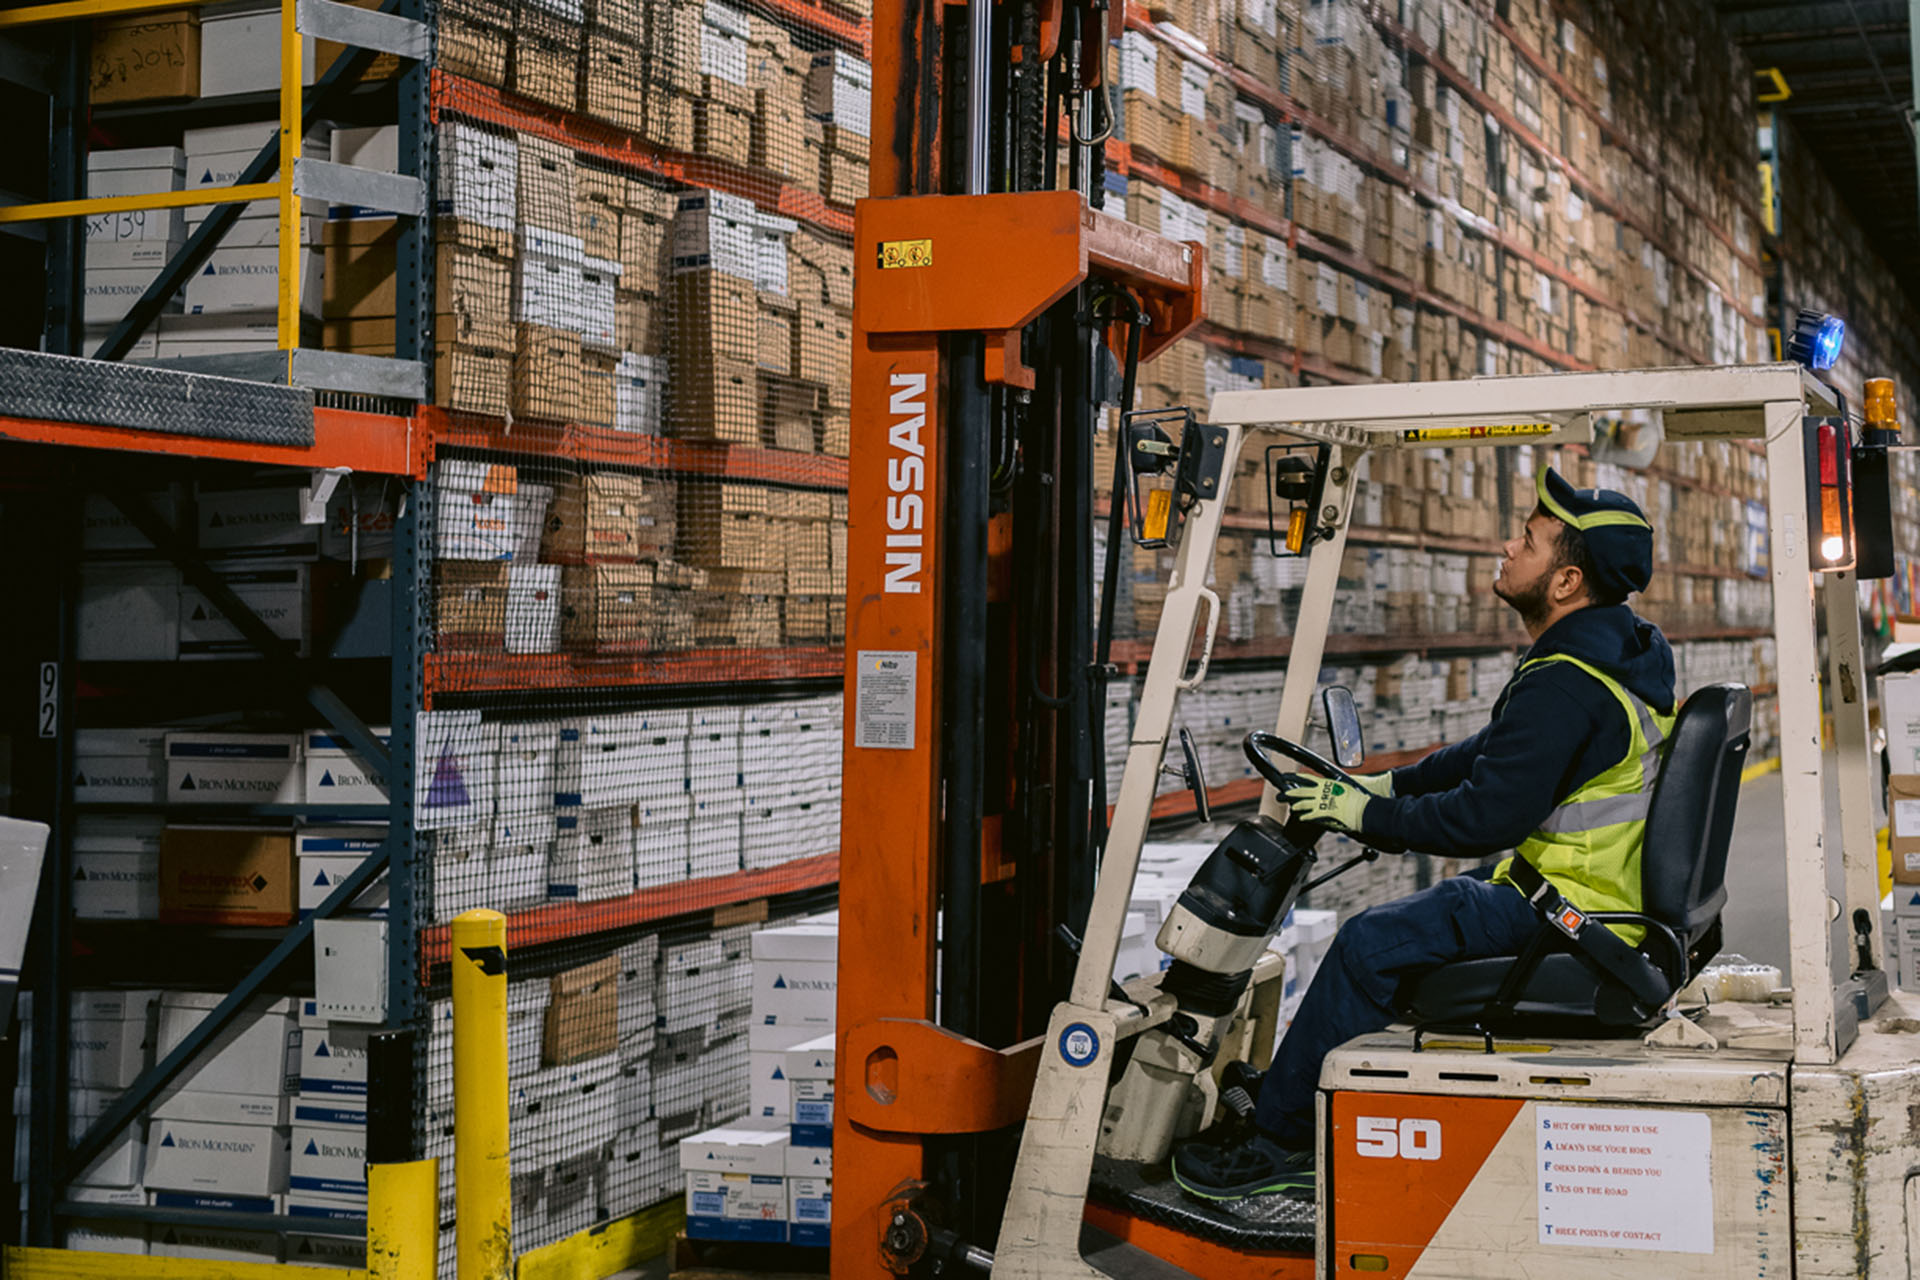 IM employee operating forklift in warehouse